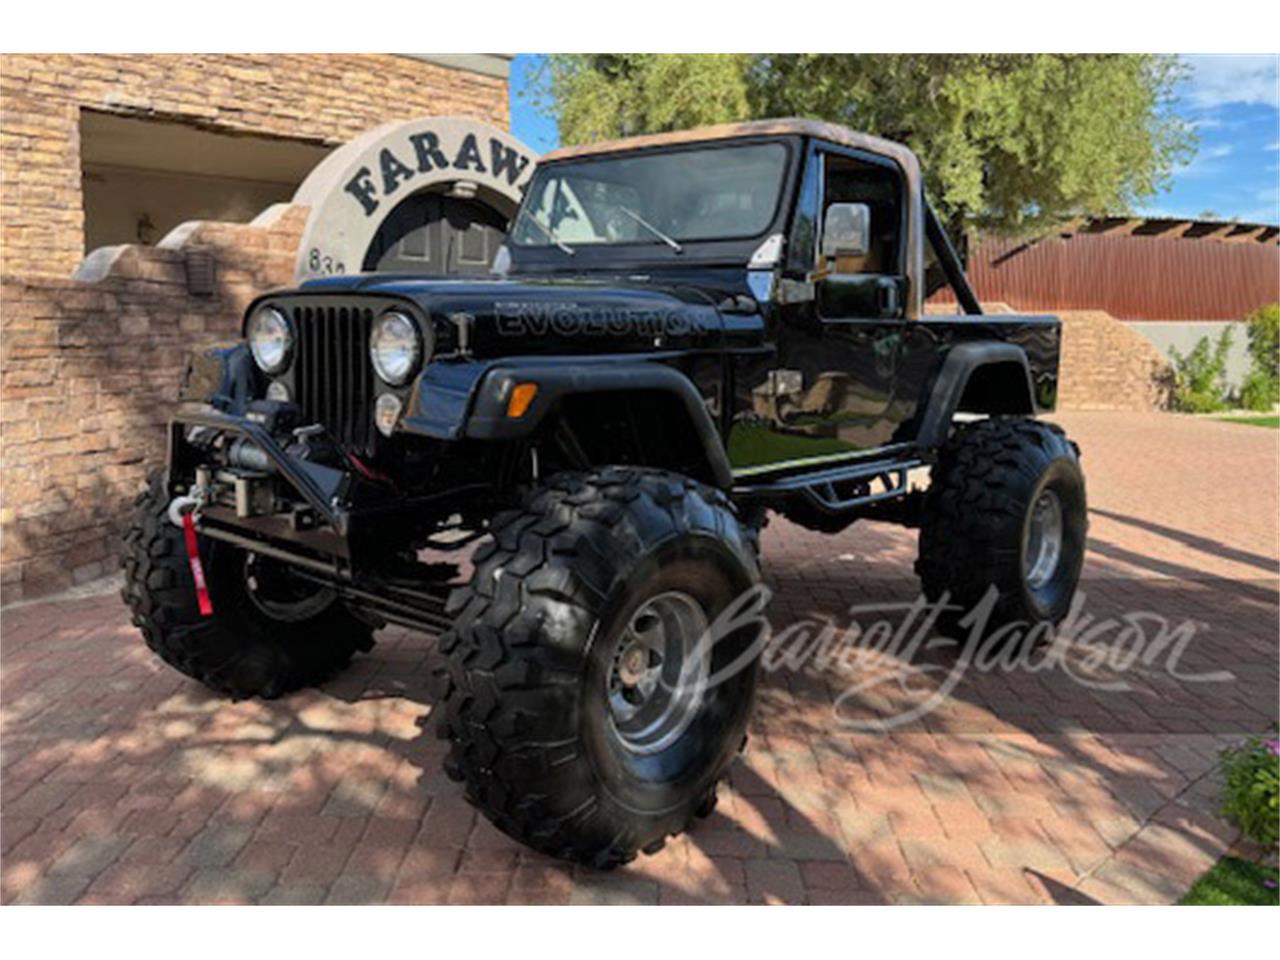 For Sale at Auction: 1982 Jeep CJ8 Scrambler in Scottsdale, Arizona for sale in Scottsdale, AZ